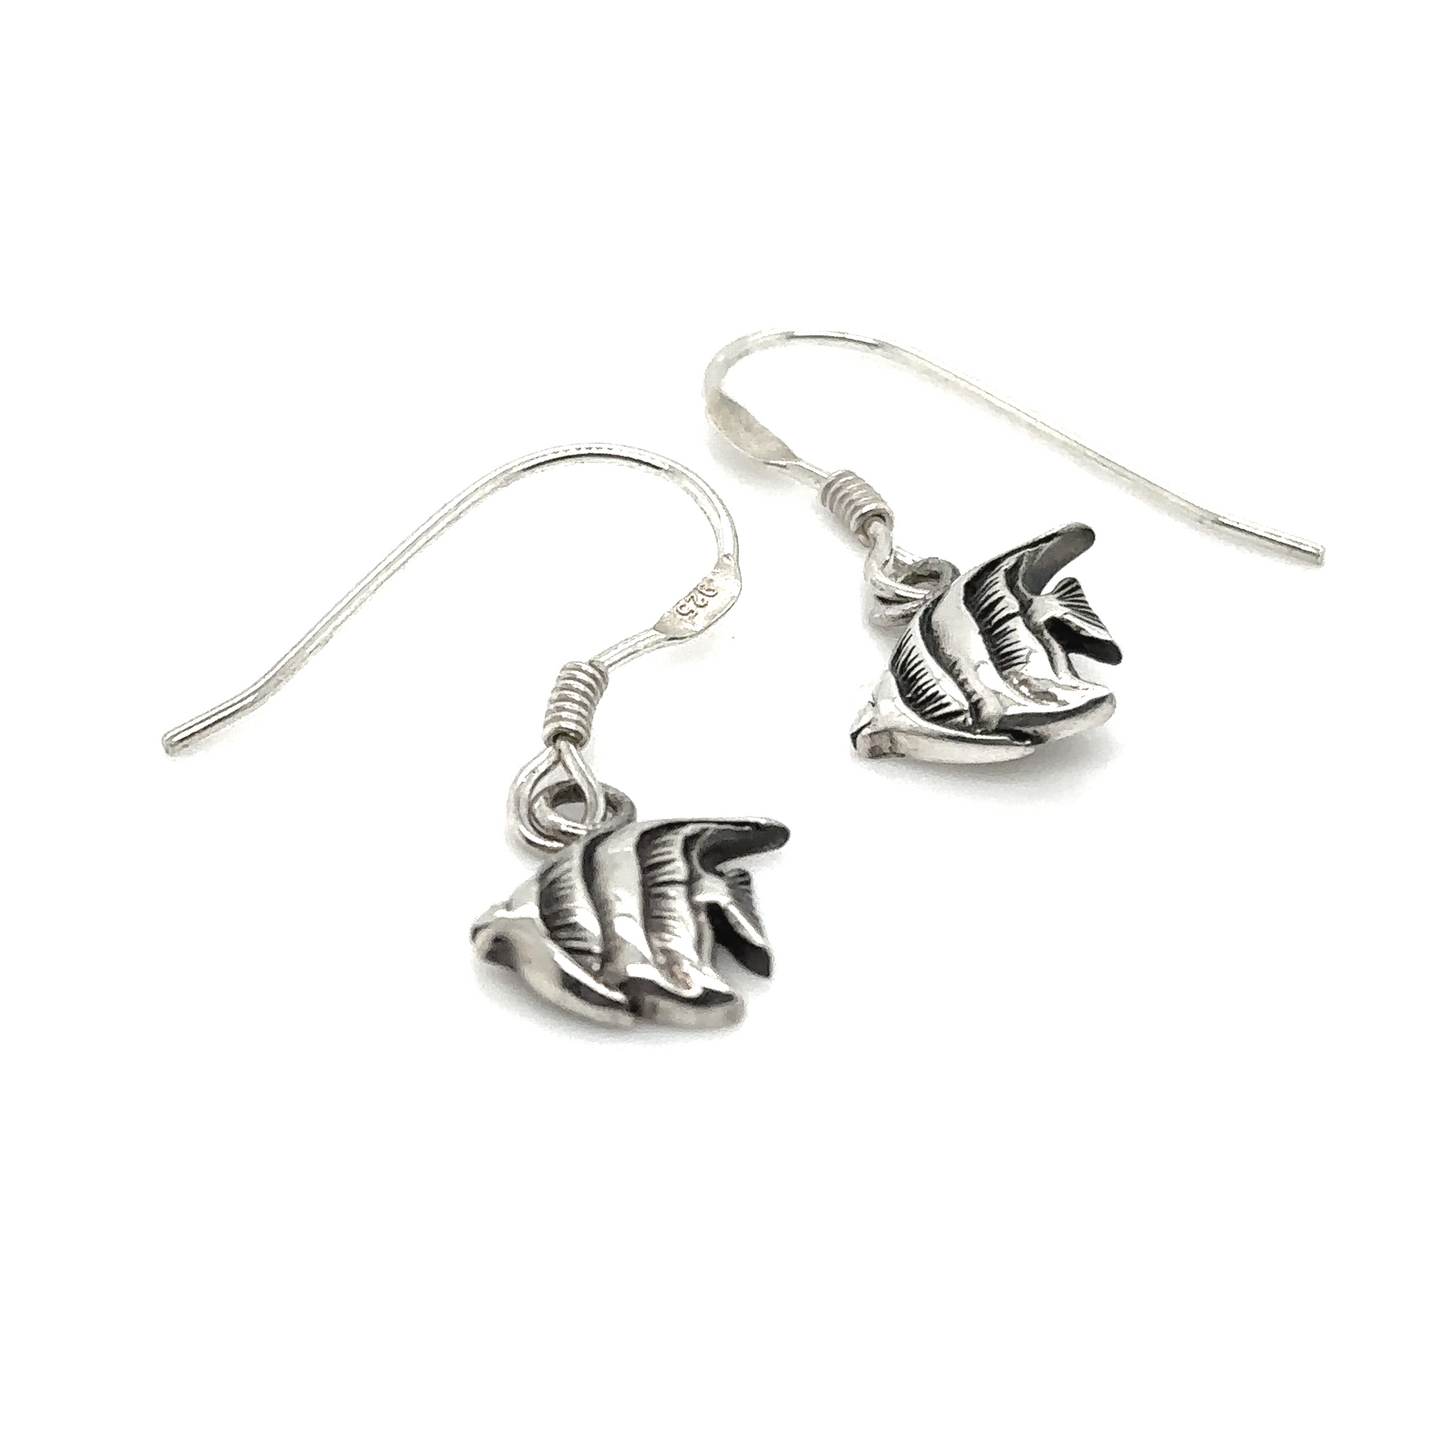 A pair of Super Silver Coral Fish Earrings on a white background.